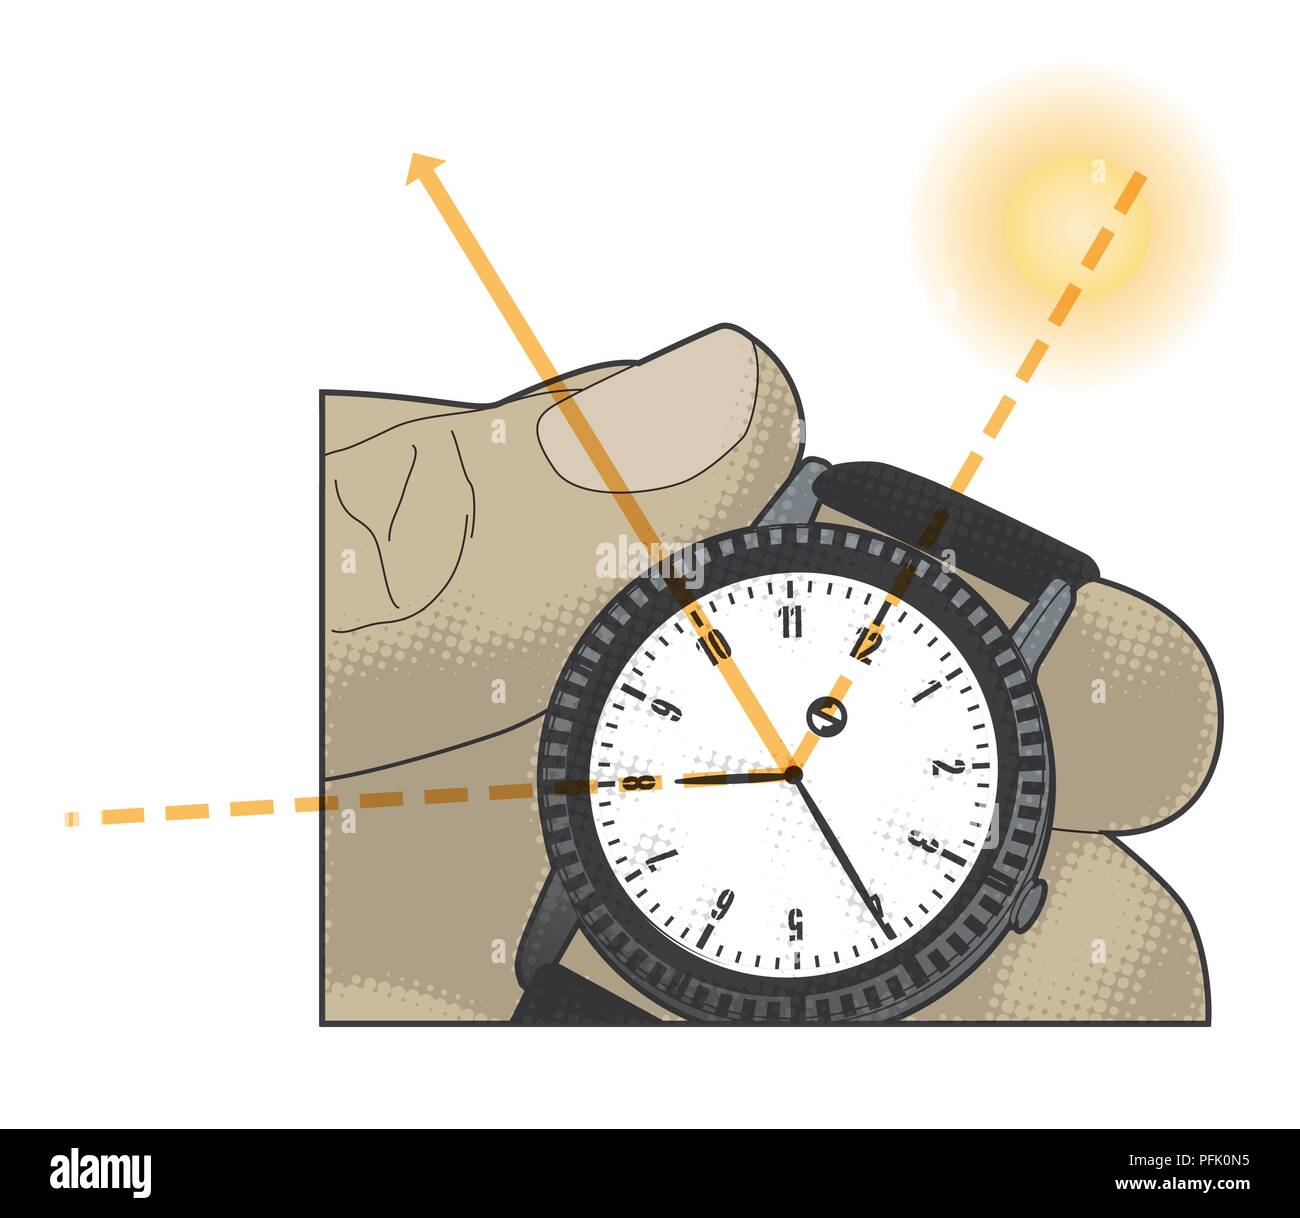 Digital illustration of analogue watch as protractor to determine approximate direction of the north Stock Photo